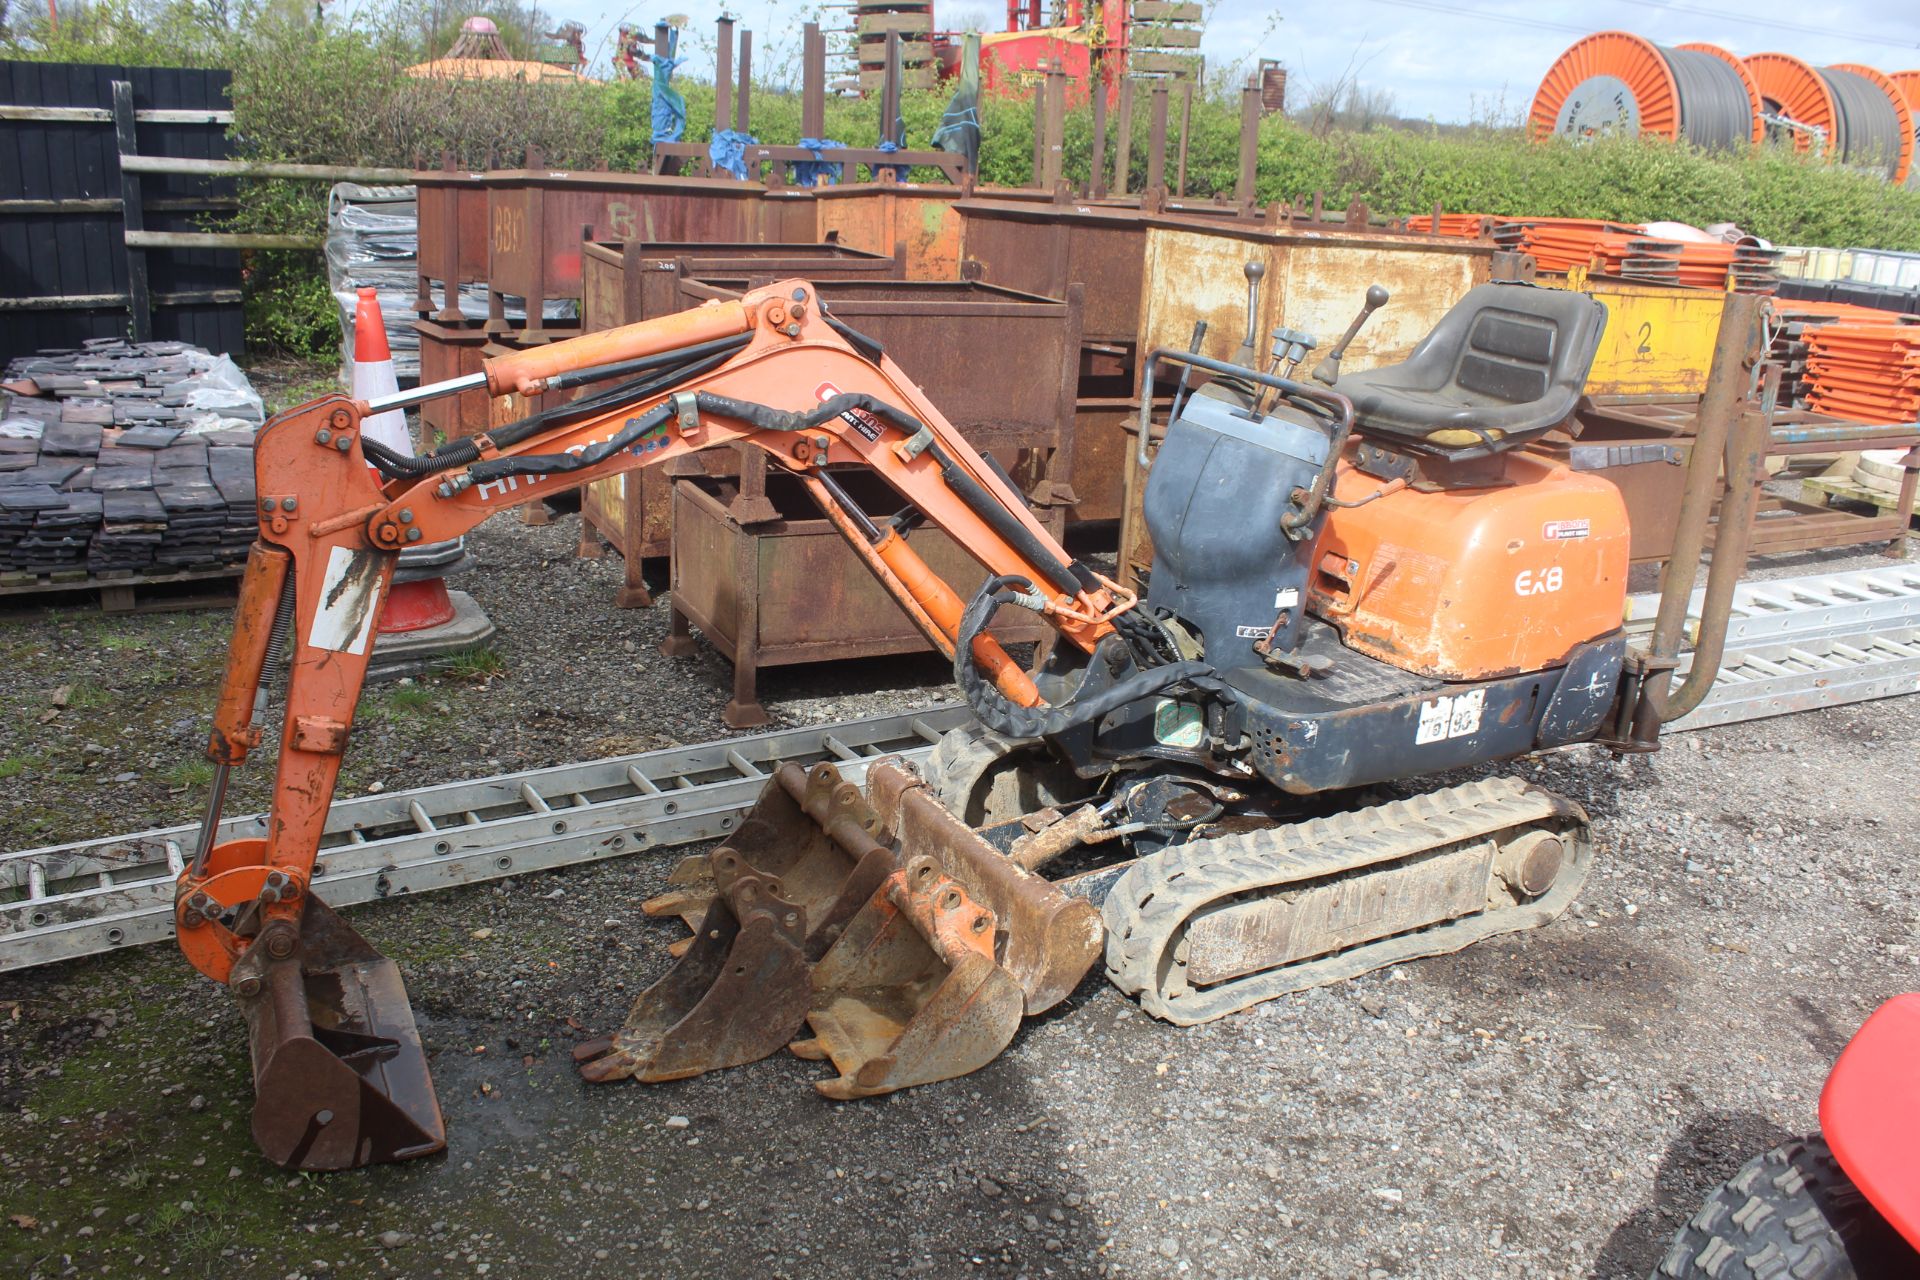 Hitachi EX8-2B 0.8T rubber track micro excavator. 2003. 2,209 hours. Serial number 1AGP004974.